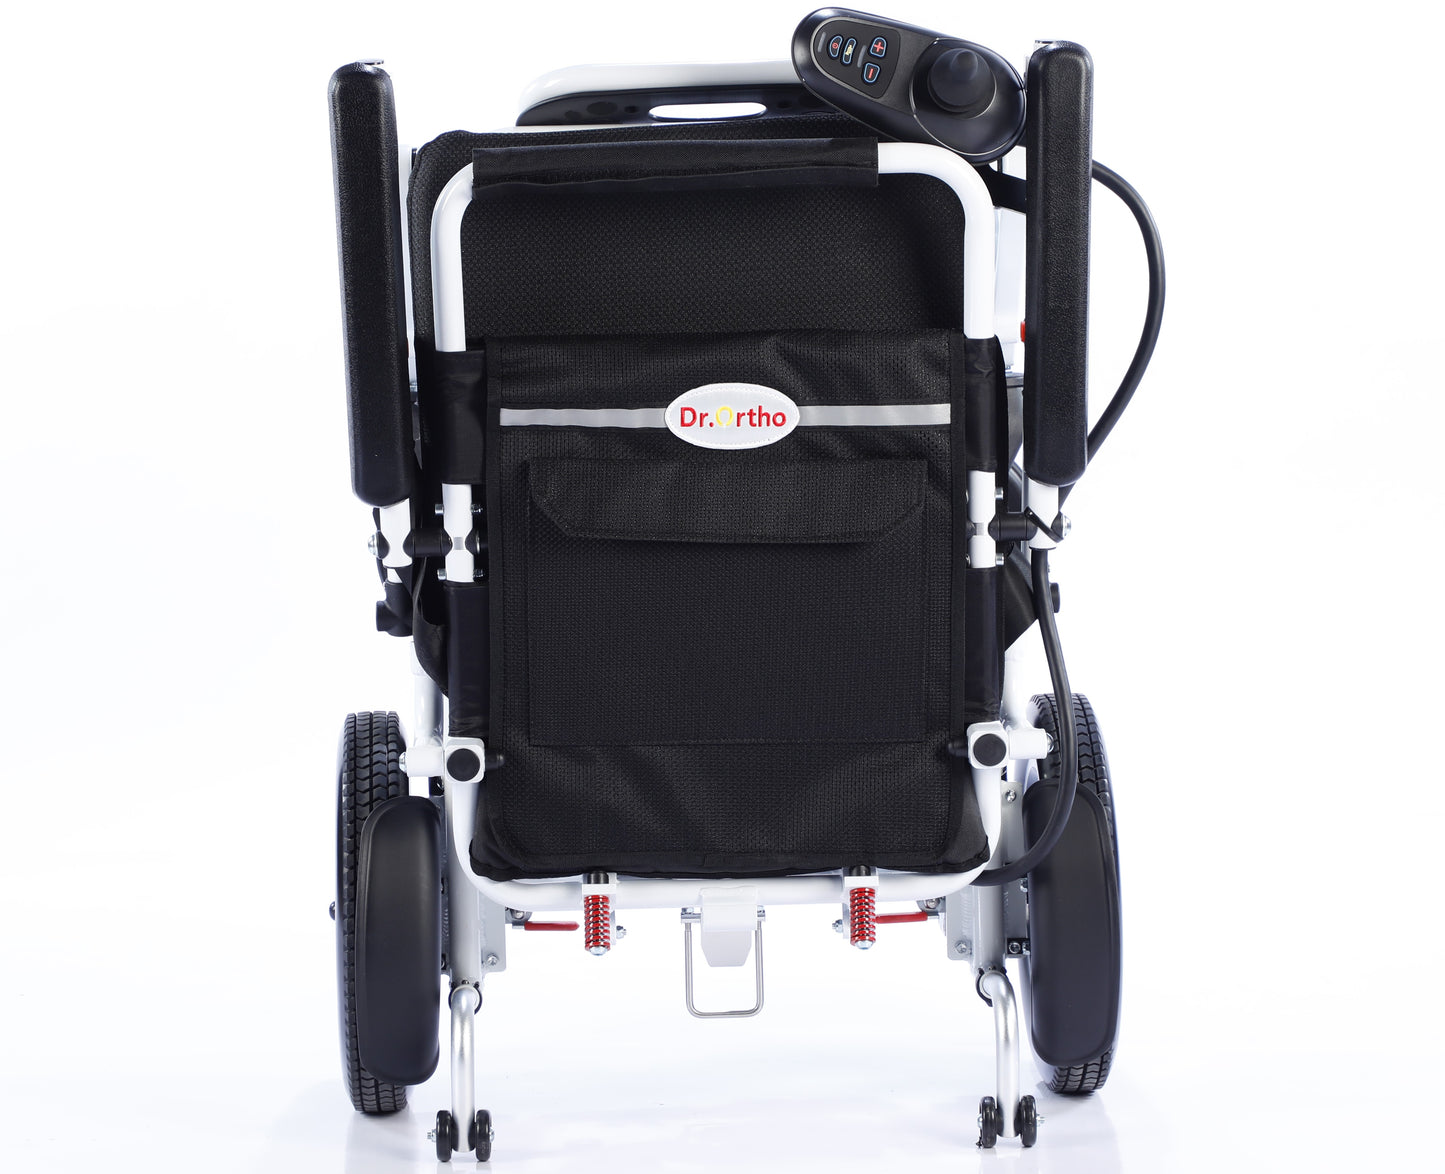 Dr.Ortho electric wheelchair DR-N-20-E light weight aluminum frame with lithium battery motor 350W